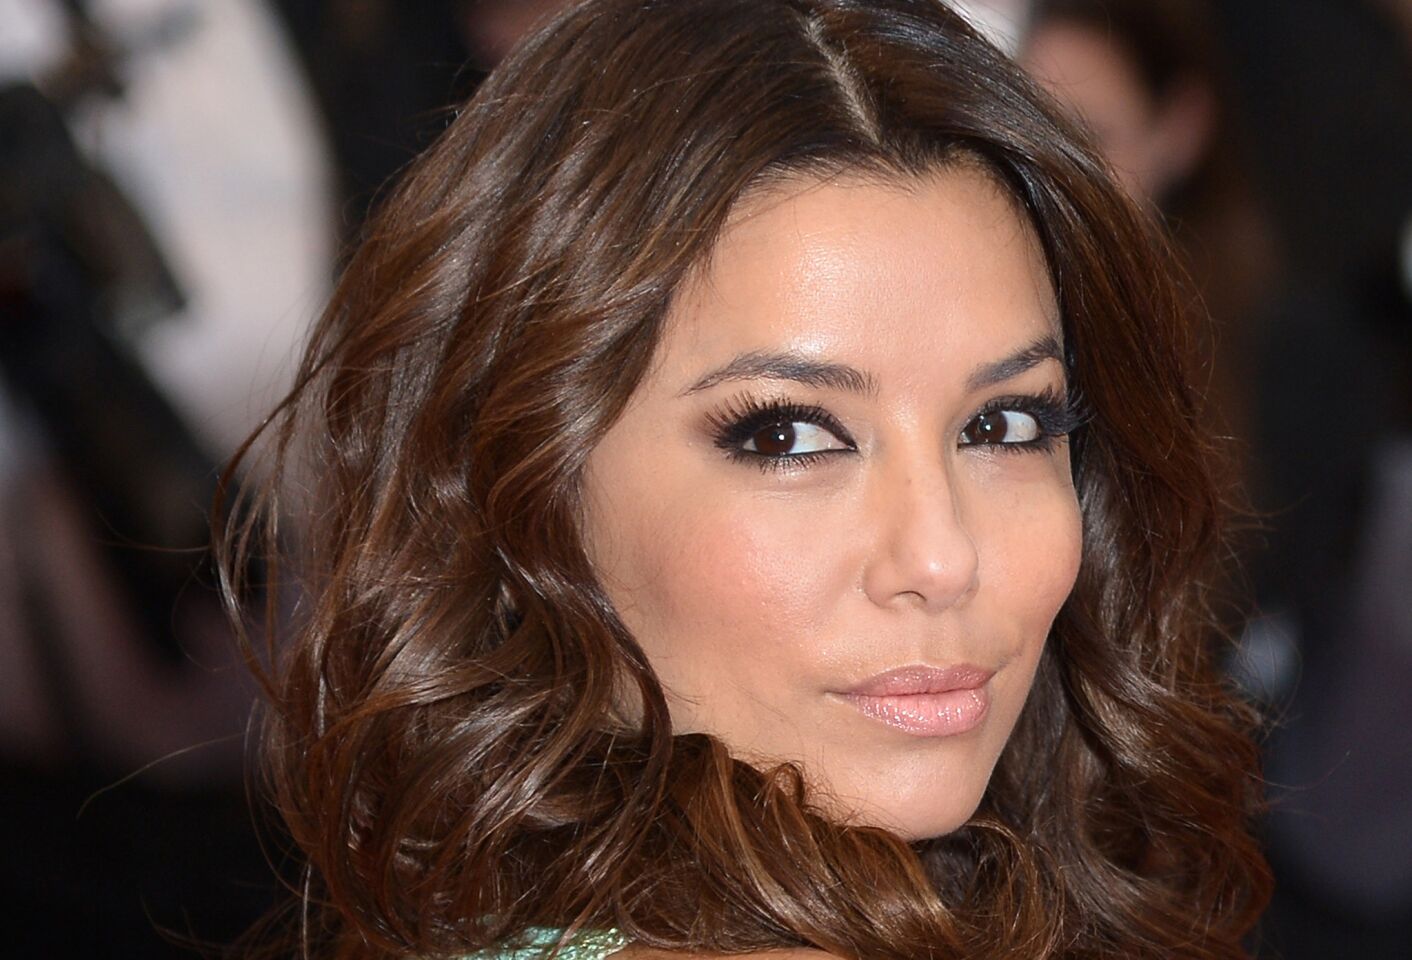 It's as if Eva Longoria and wardrobe malfunctions go hand in hand. A two-time offender, Longoria once lifted her high-slit dress to brush off the water it caught, unfortunately exposing her lack of undies at the 2013 Cannes Film Festival. She also briefly and accidentally flashed the world on David Letterman's show in an interview segment done while wearing a dangerously low-cut tuxedo jacket.